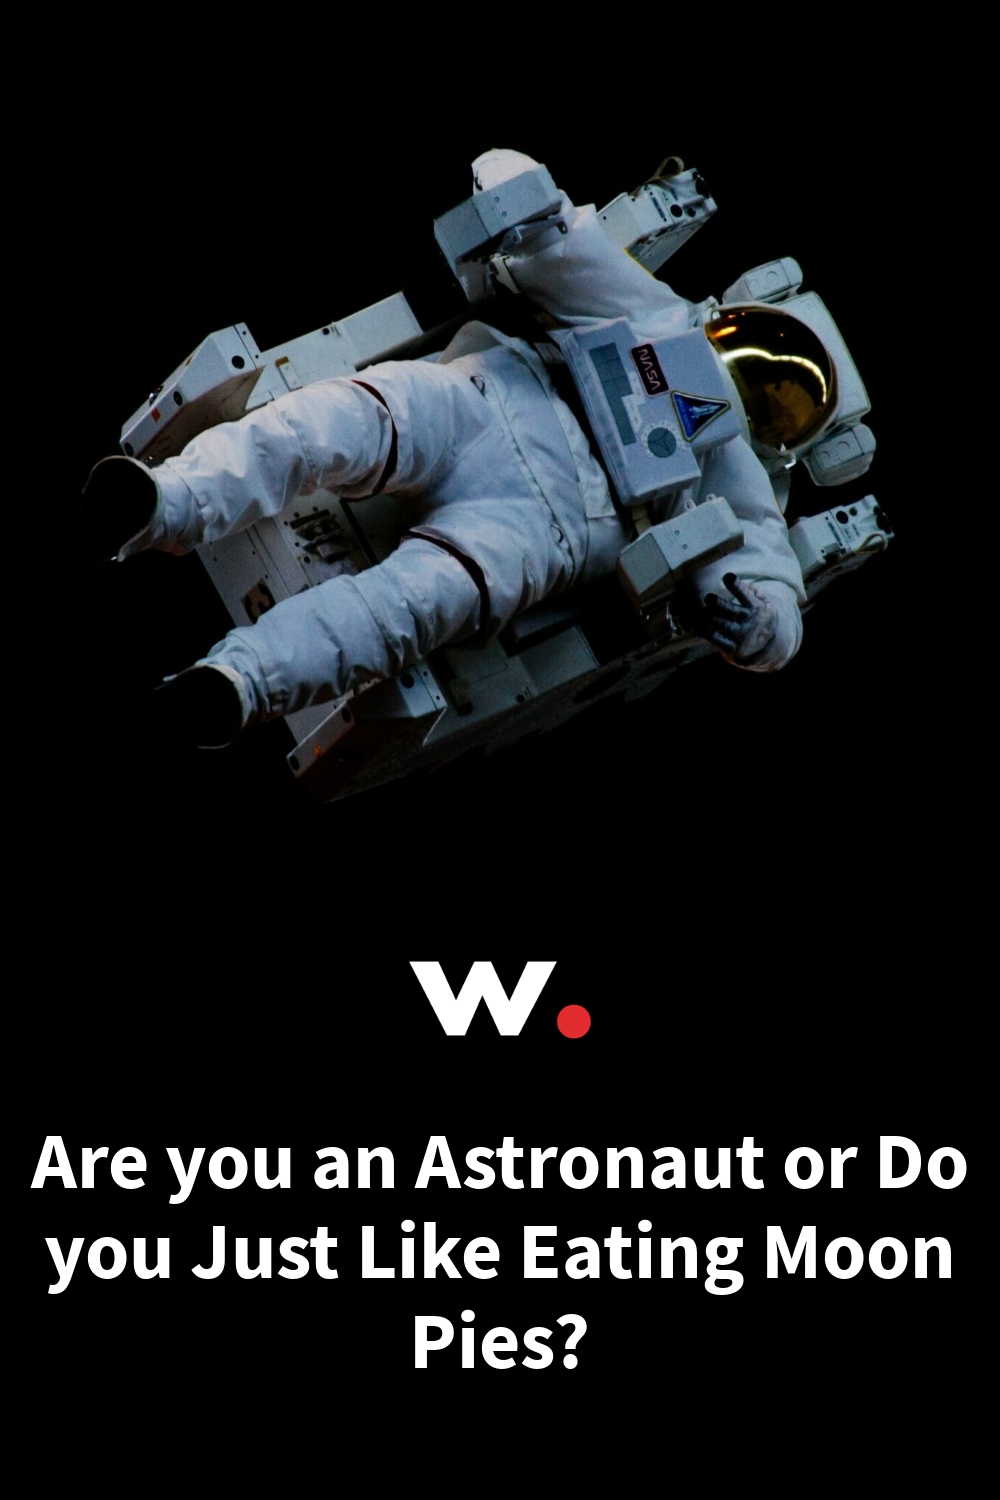 Are you an Astronaut or Do you Just Like Eating Moon Pies?